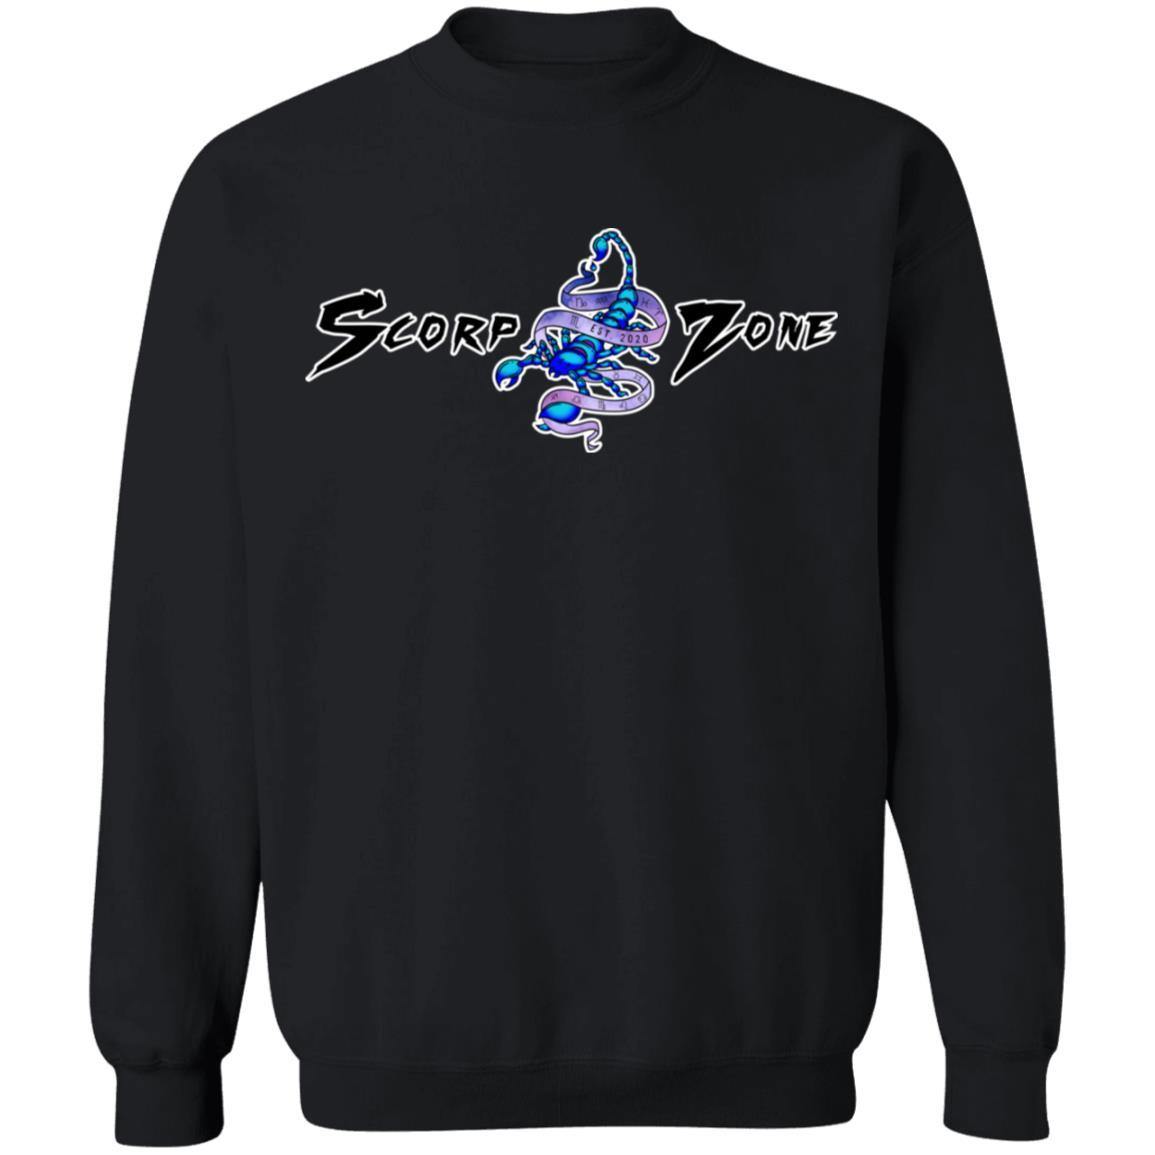 LIBRA DESIGN ON BACK AND SMALL SCORP ZONE LOGO ON FRONT -Z65 Crewneck Pullover Sweatshirt - ScorpZone